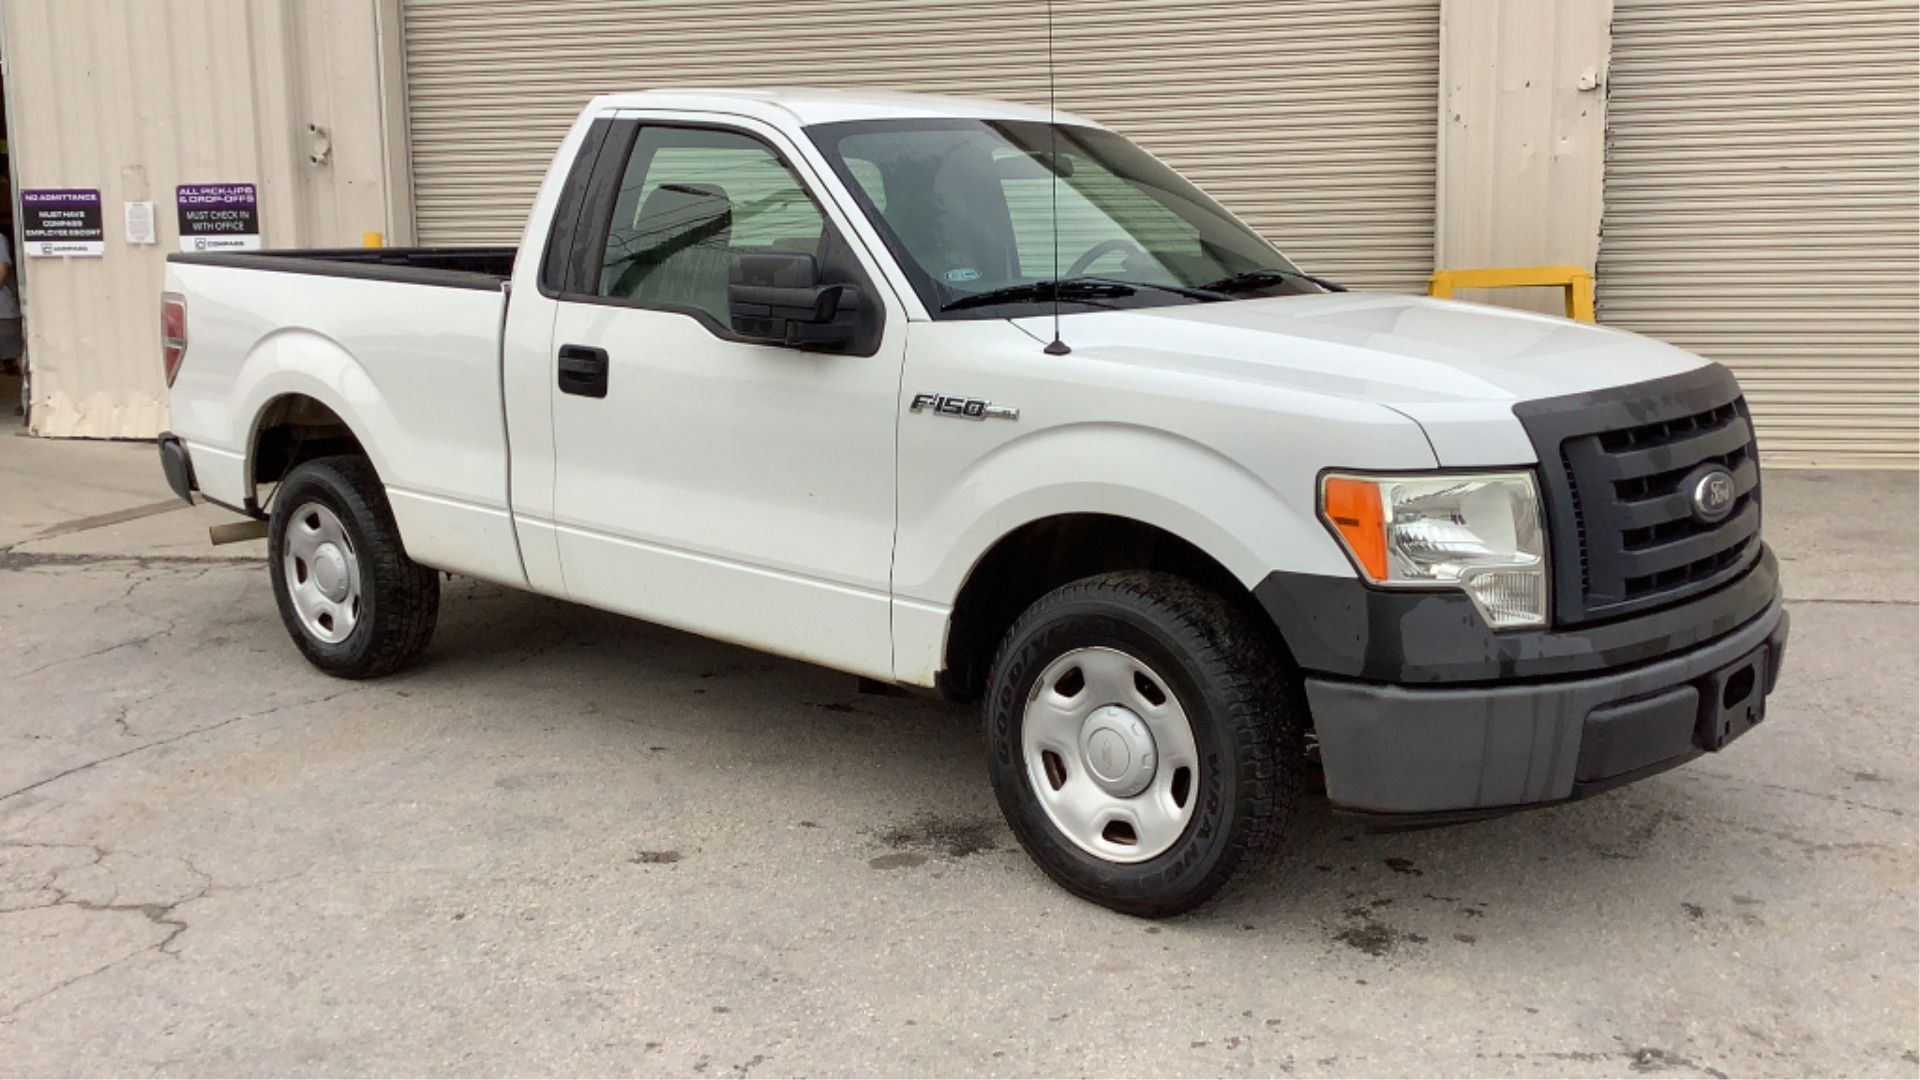 2009 Ford F-150 Regular Cab XL 2WD - Image 4 of 71